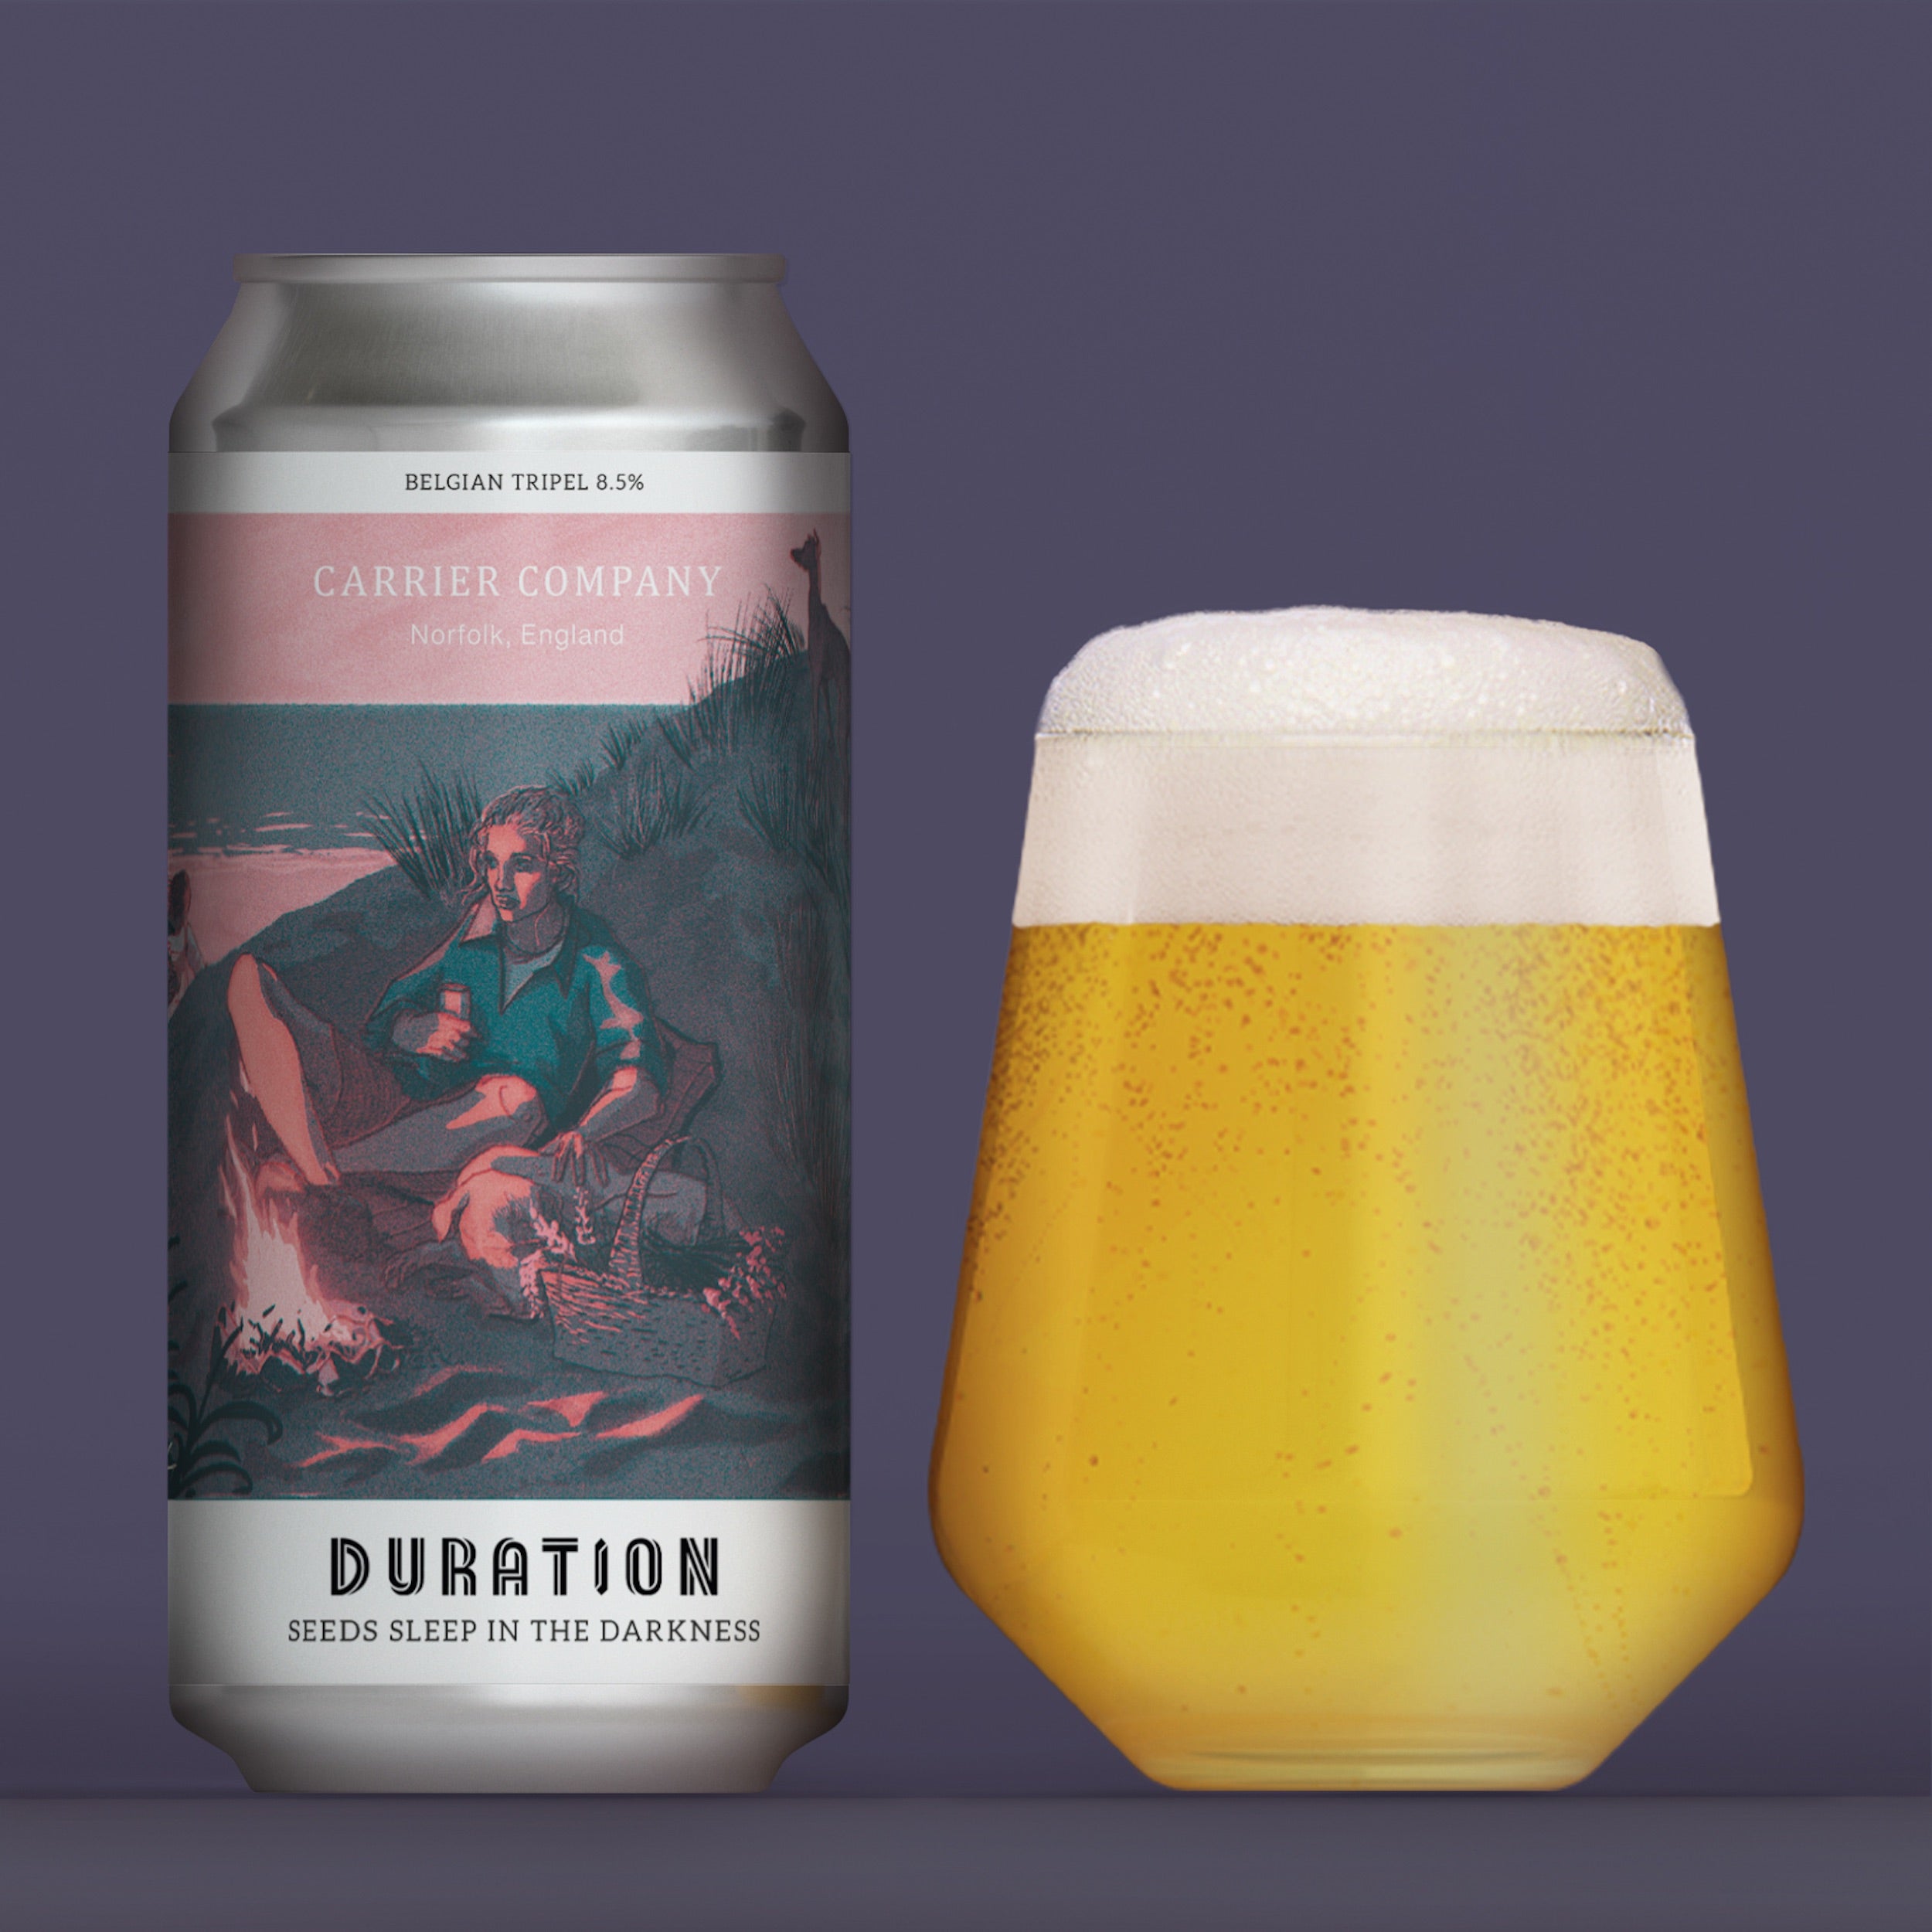 Carrier Company & Duration Brewery Seeds Sleep In The Darkness